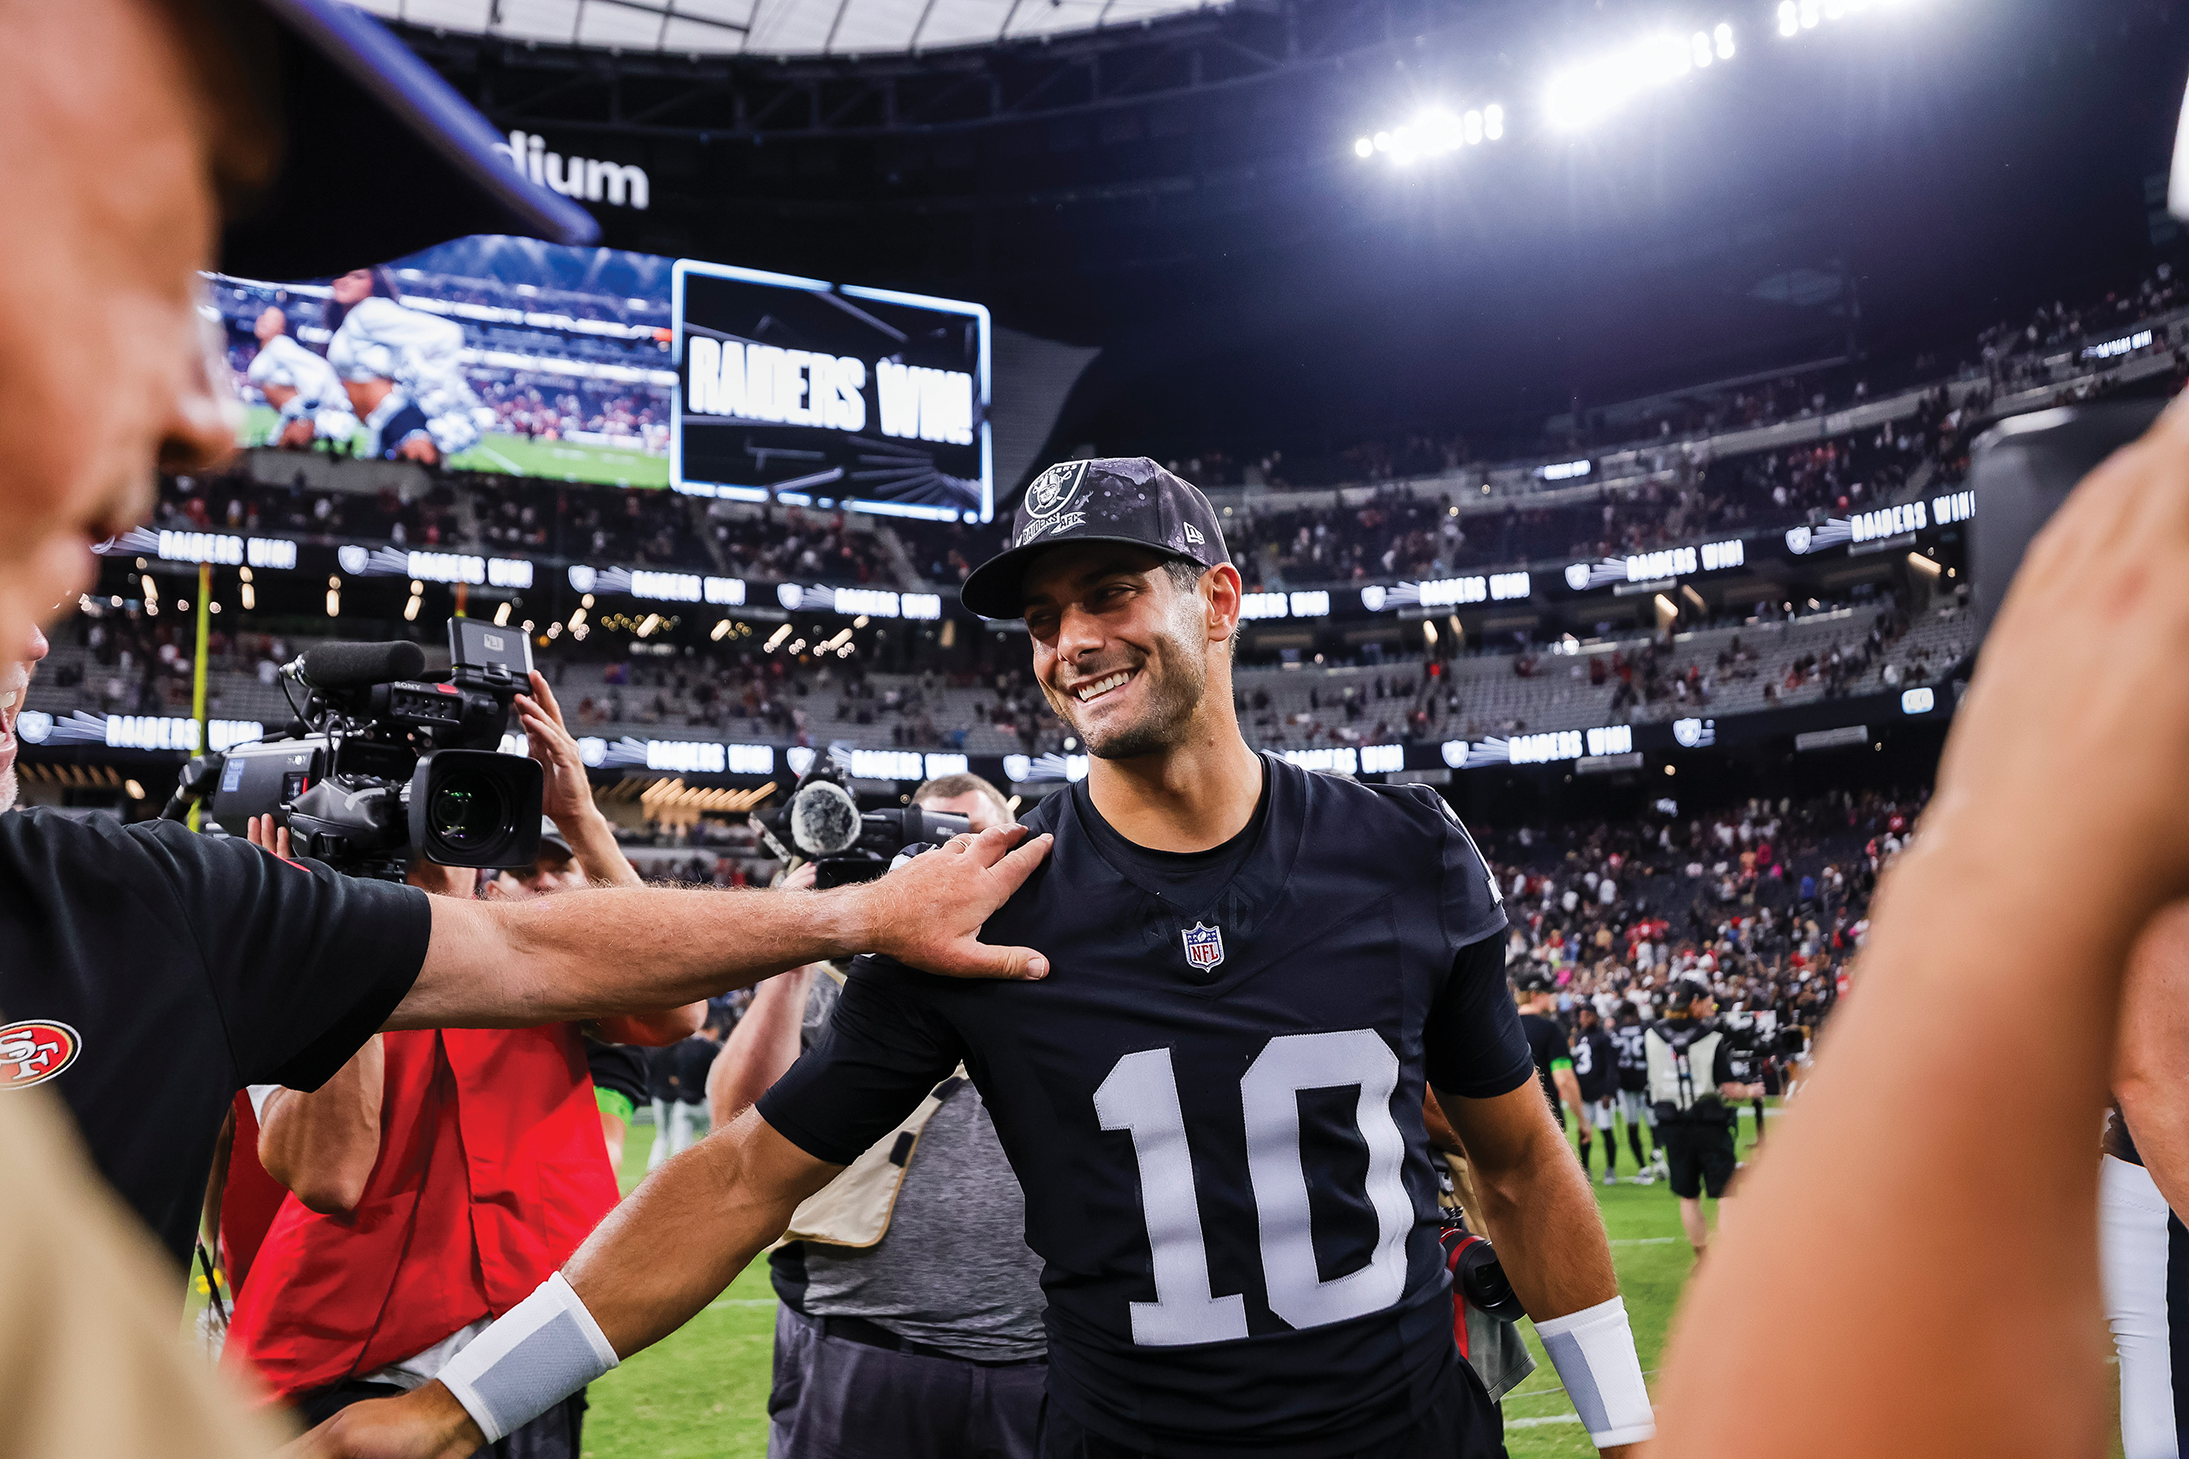 Jimmy G' is fitting right in as Derek Carr's starting quarterback